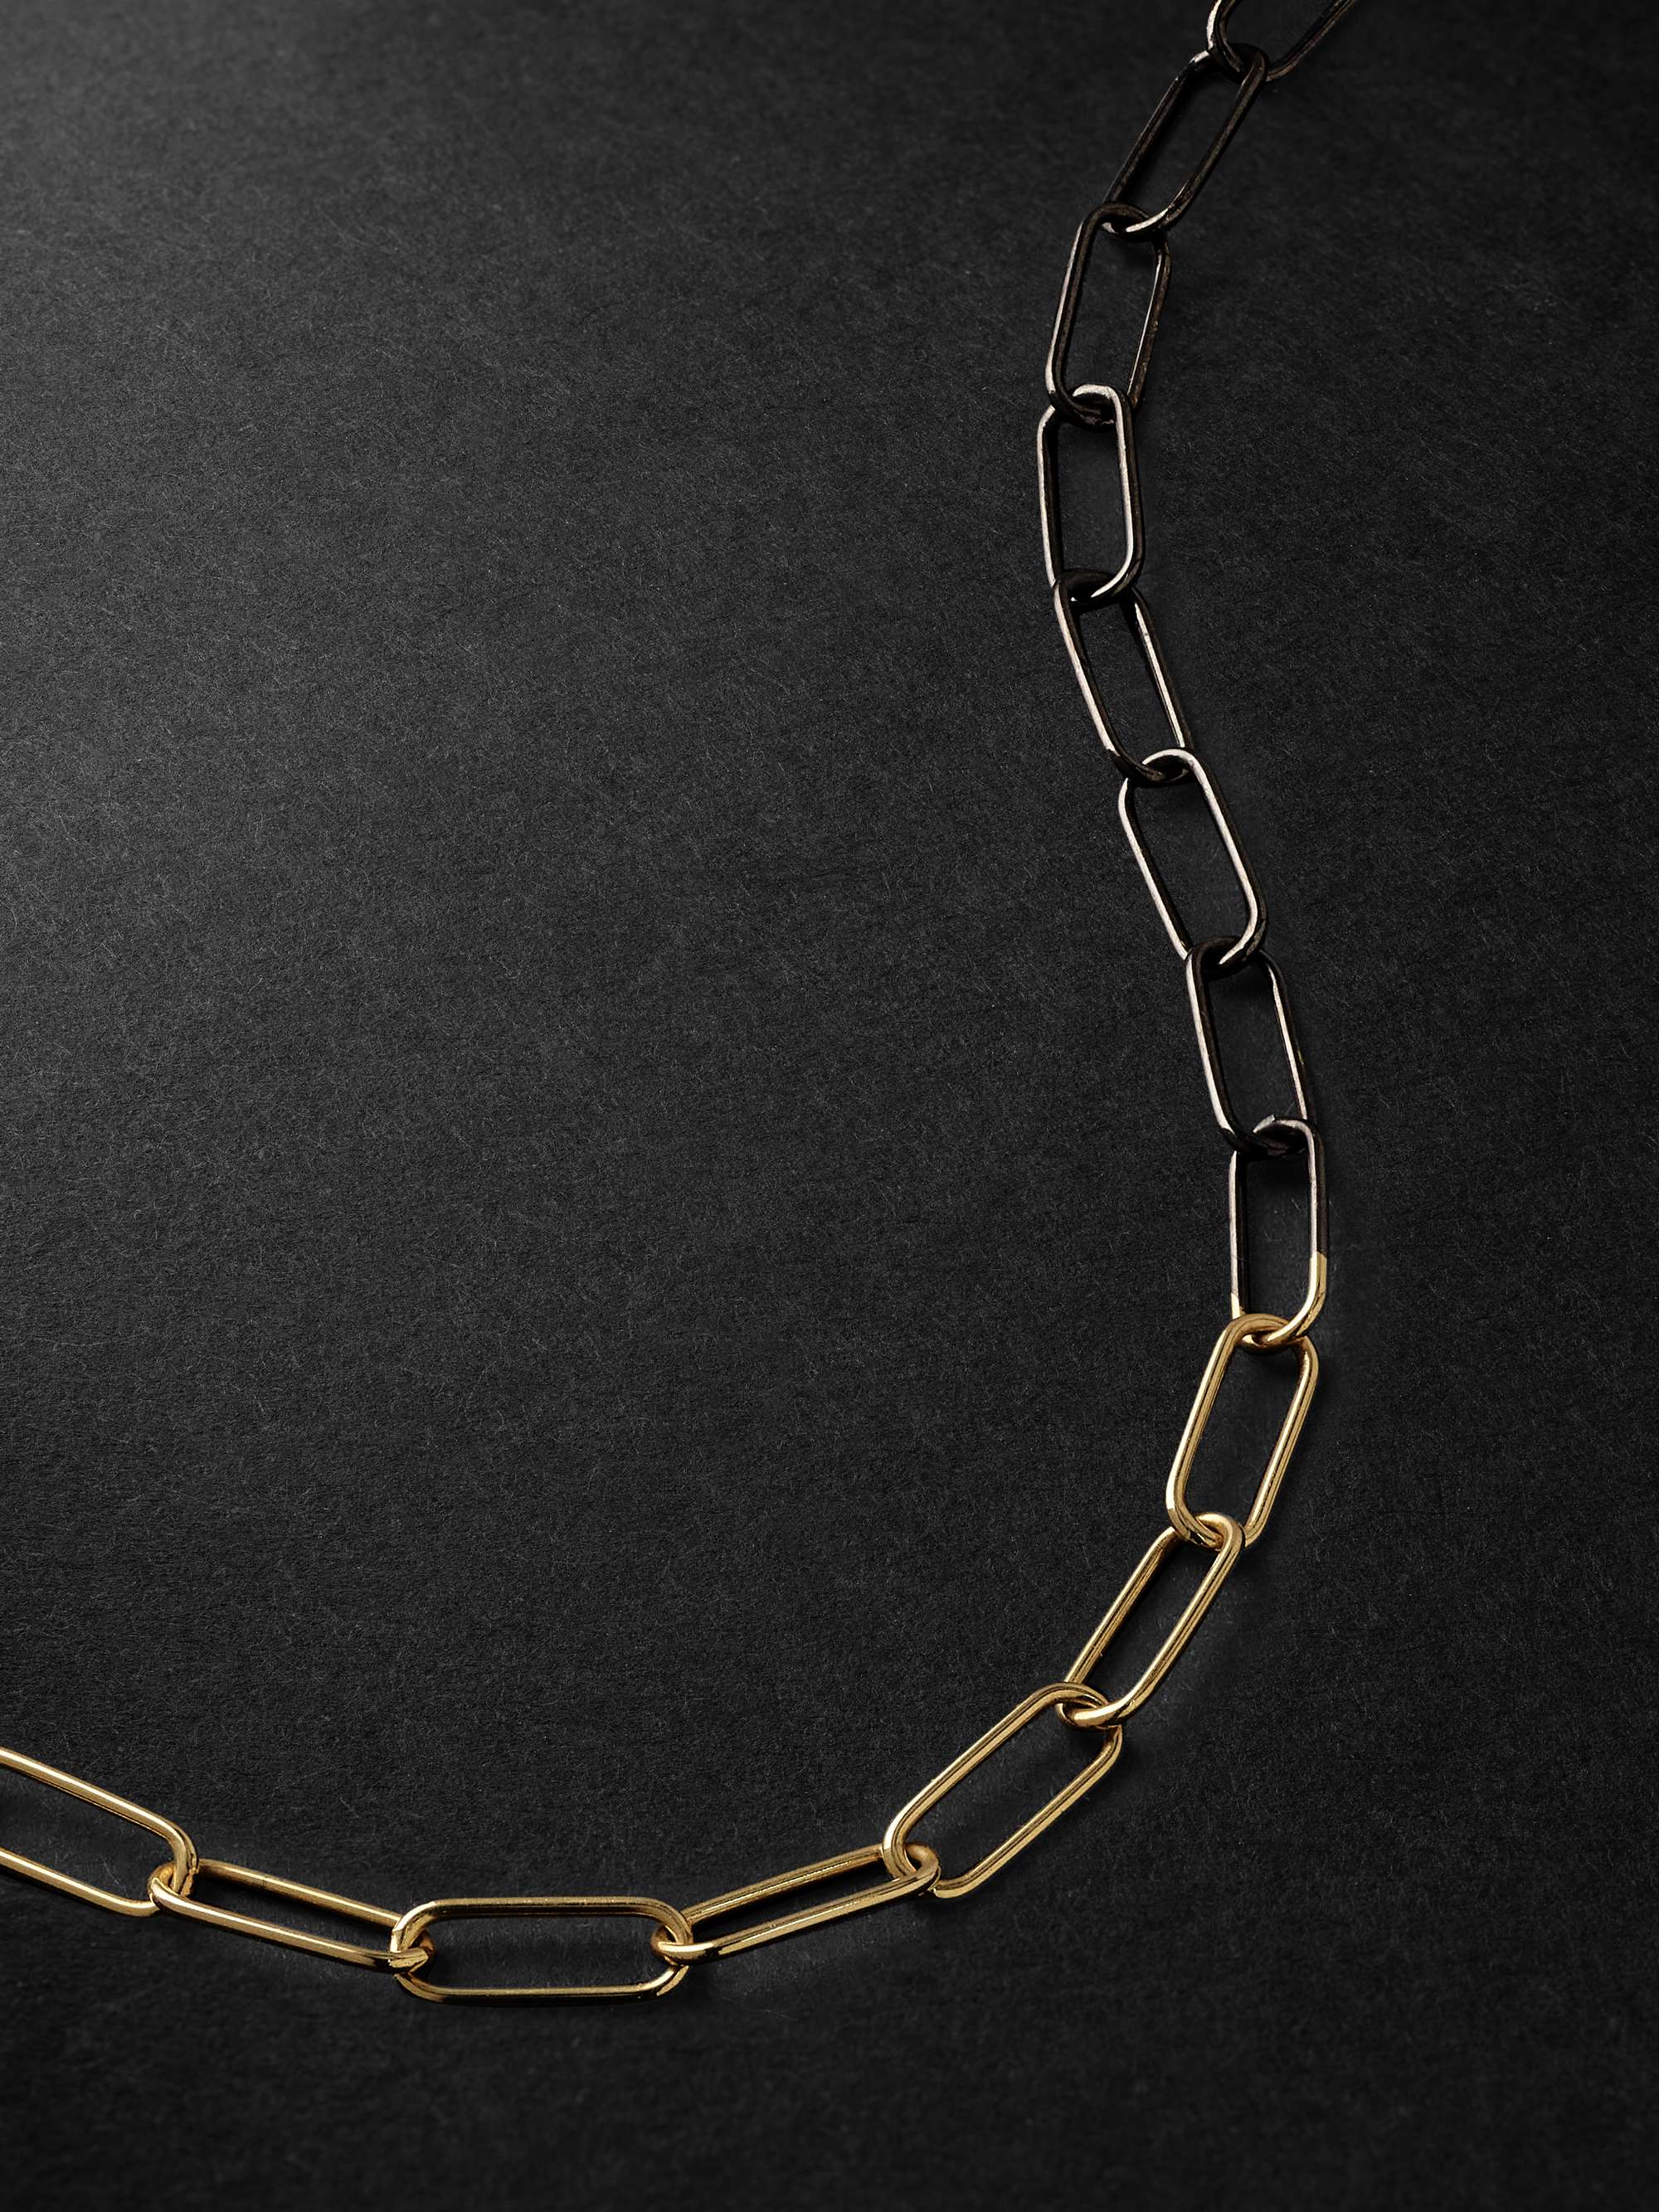 ANNOUSHKA Gold and Rhodium-Plated Chain Necklace